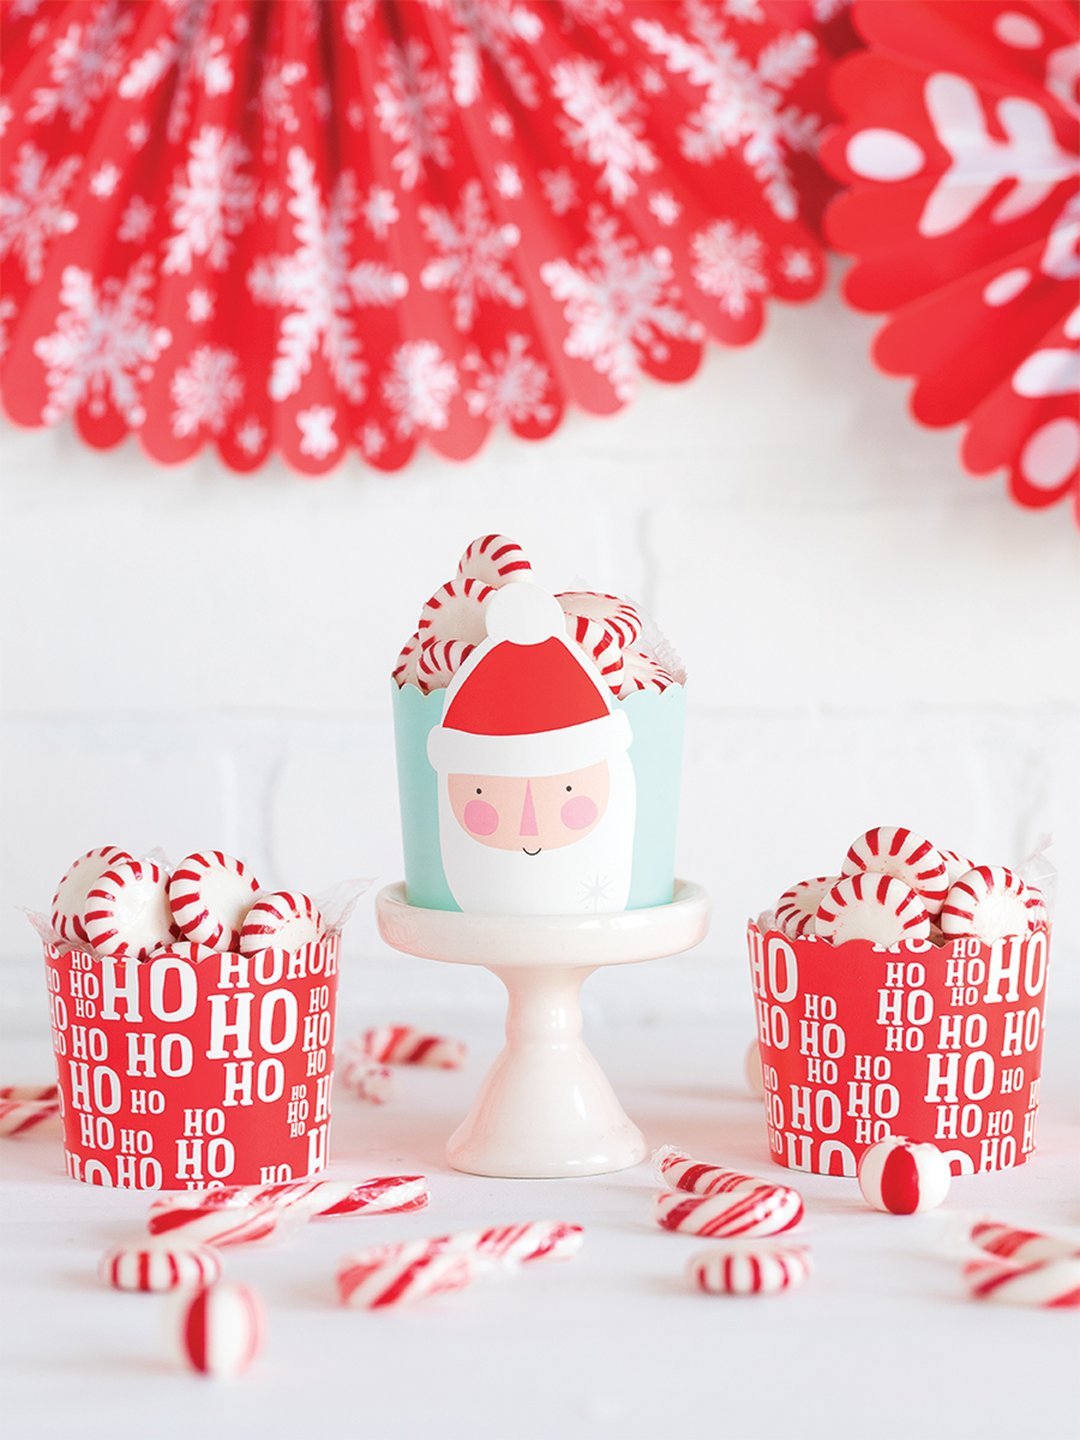 Ho Ho Ho Santa Baking cups displayed on a table with candy canes spread around them and each cup holding red and white mint candies